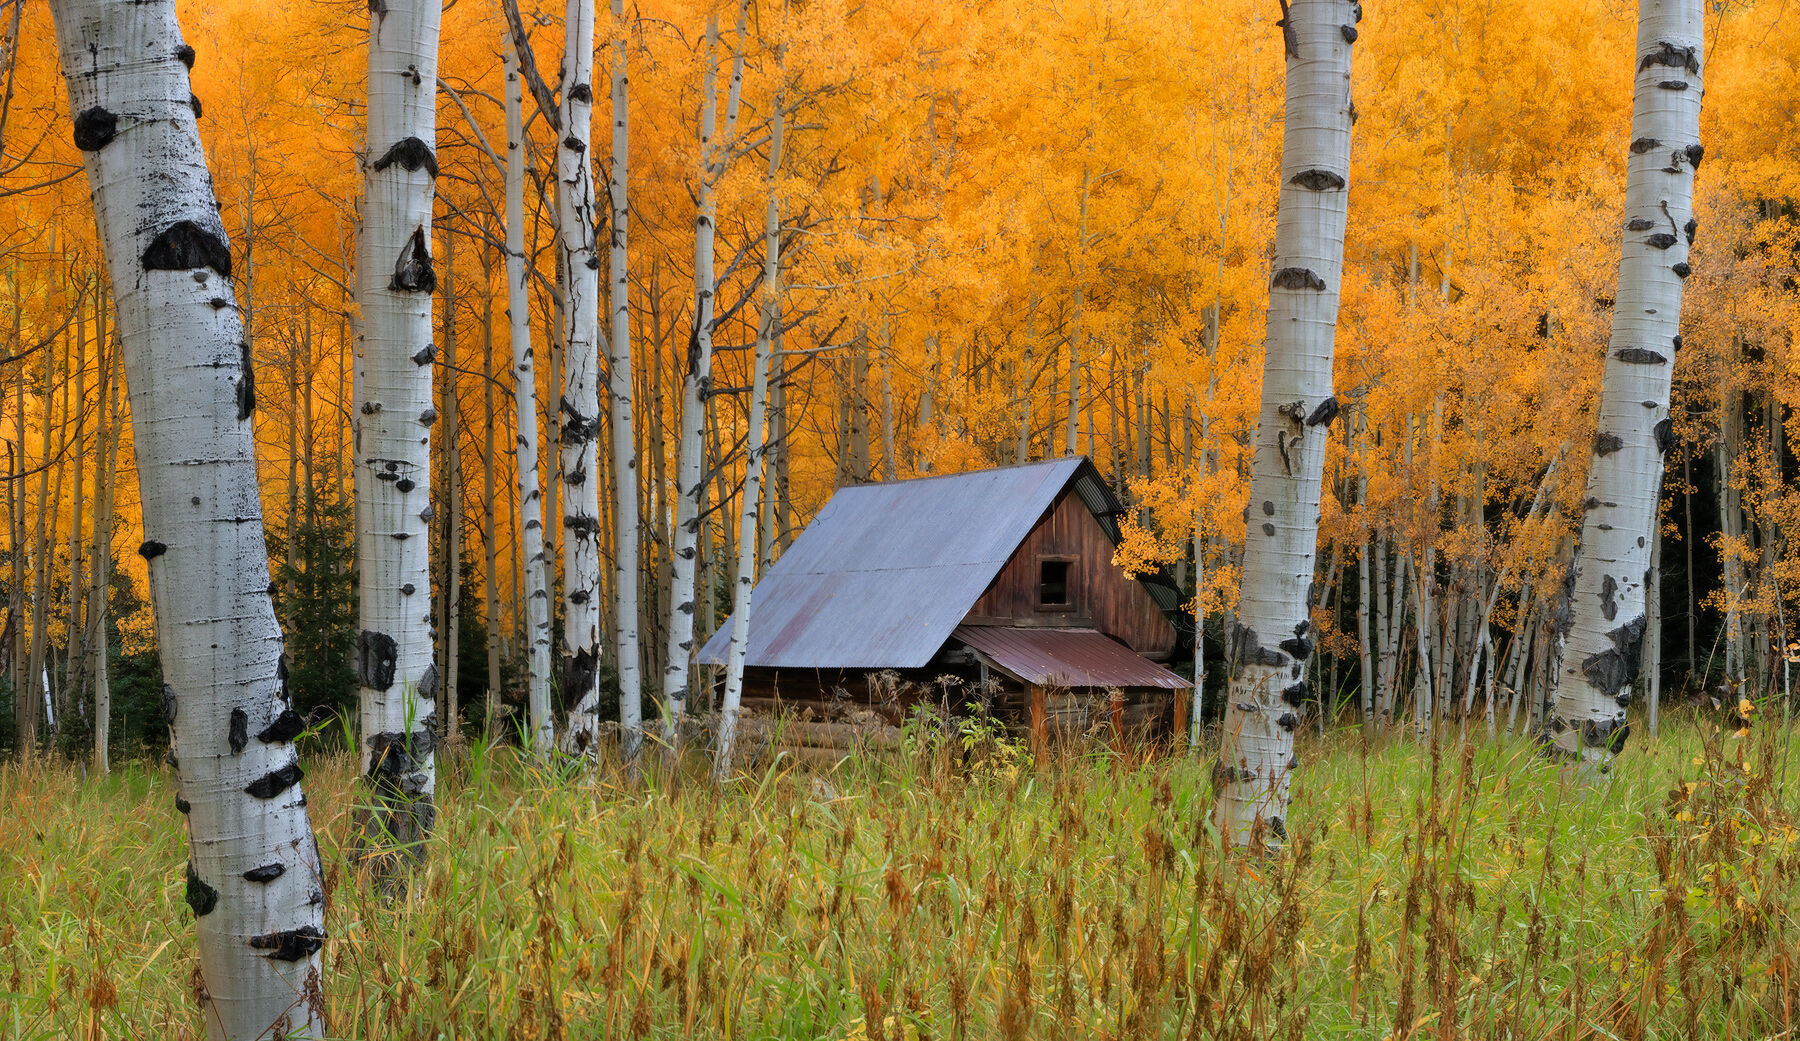 Old log cabin in the aspen forest with tall green meadow grasses and golden yellow leaves on the trees.